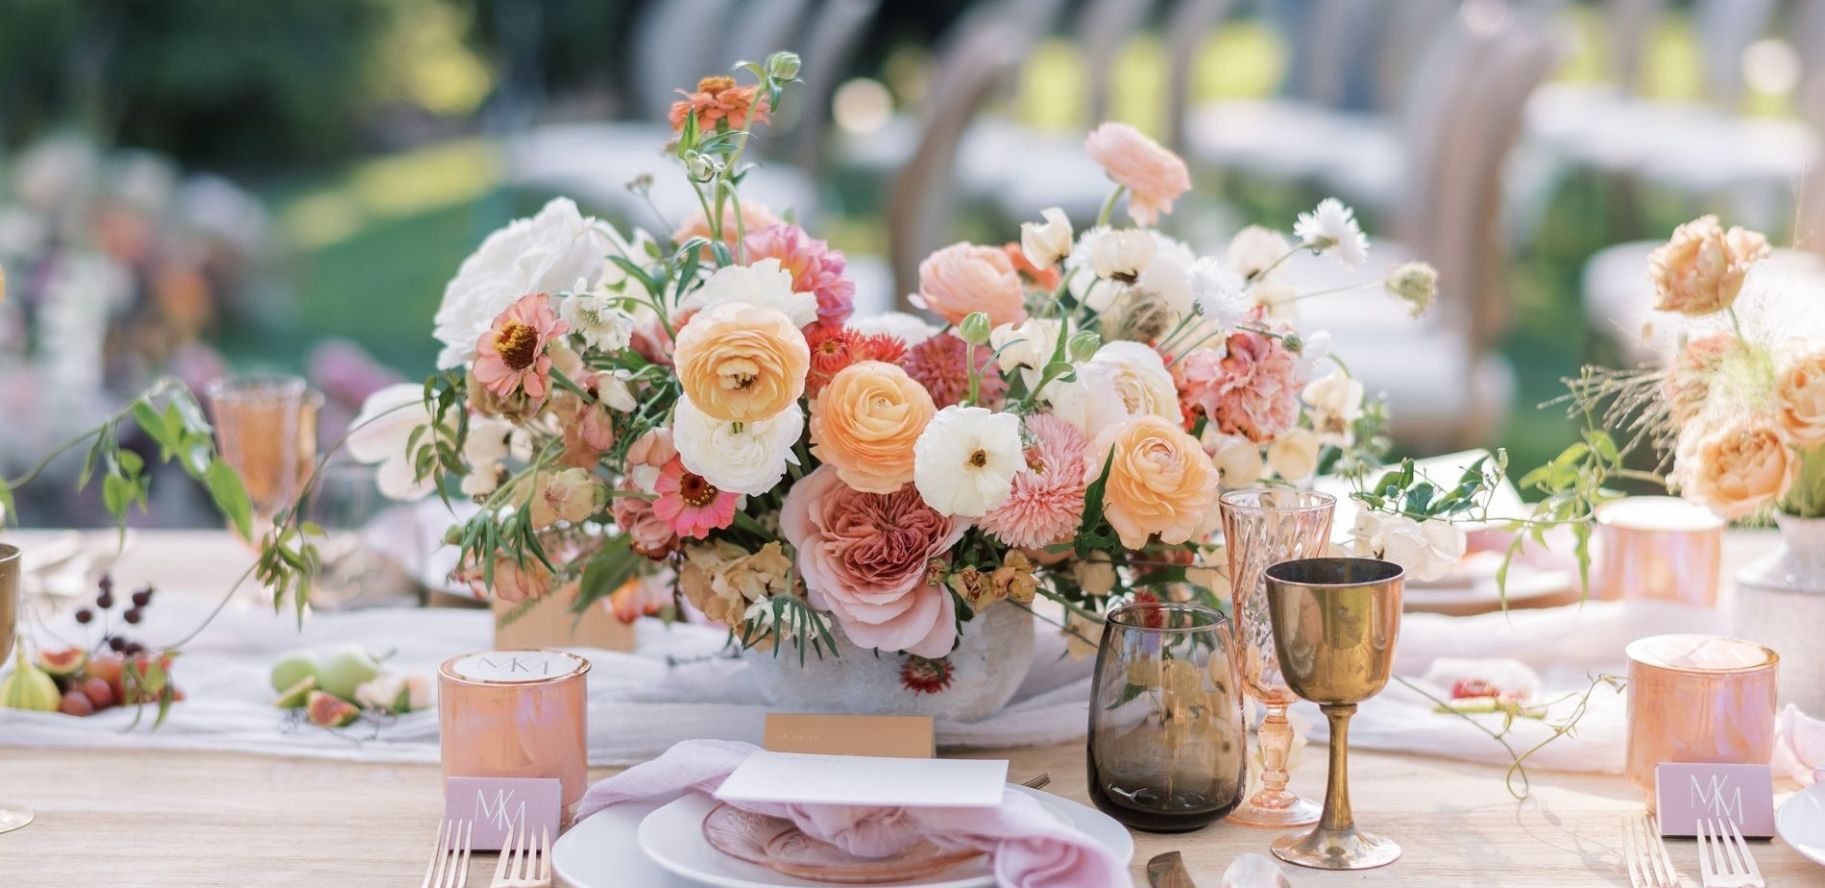 13 DIY Wedding Centerpieces Your Budget Will Love - Fiftyflowers